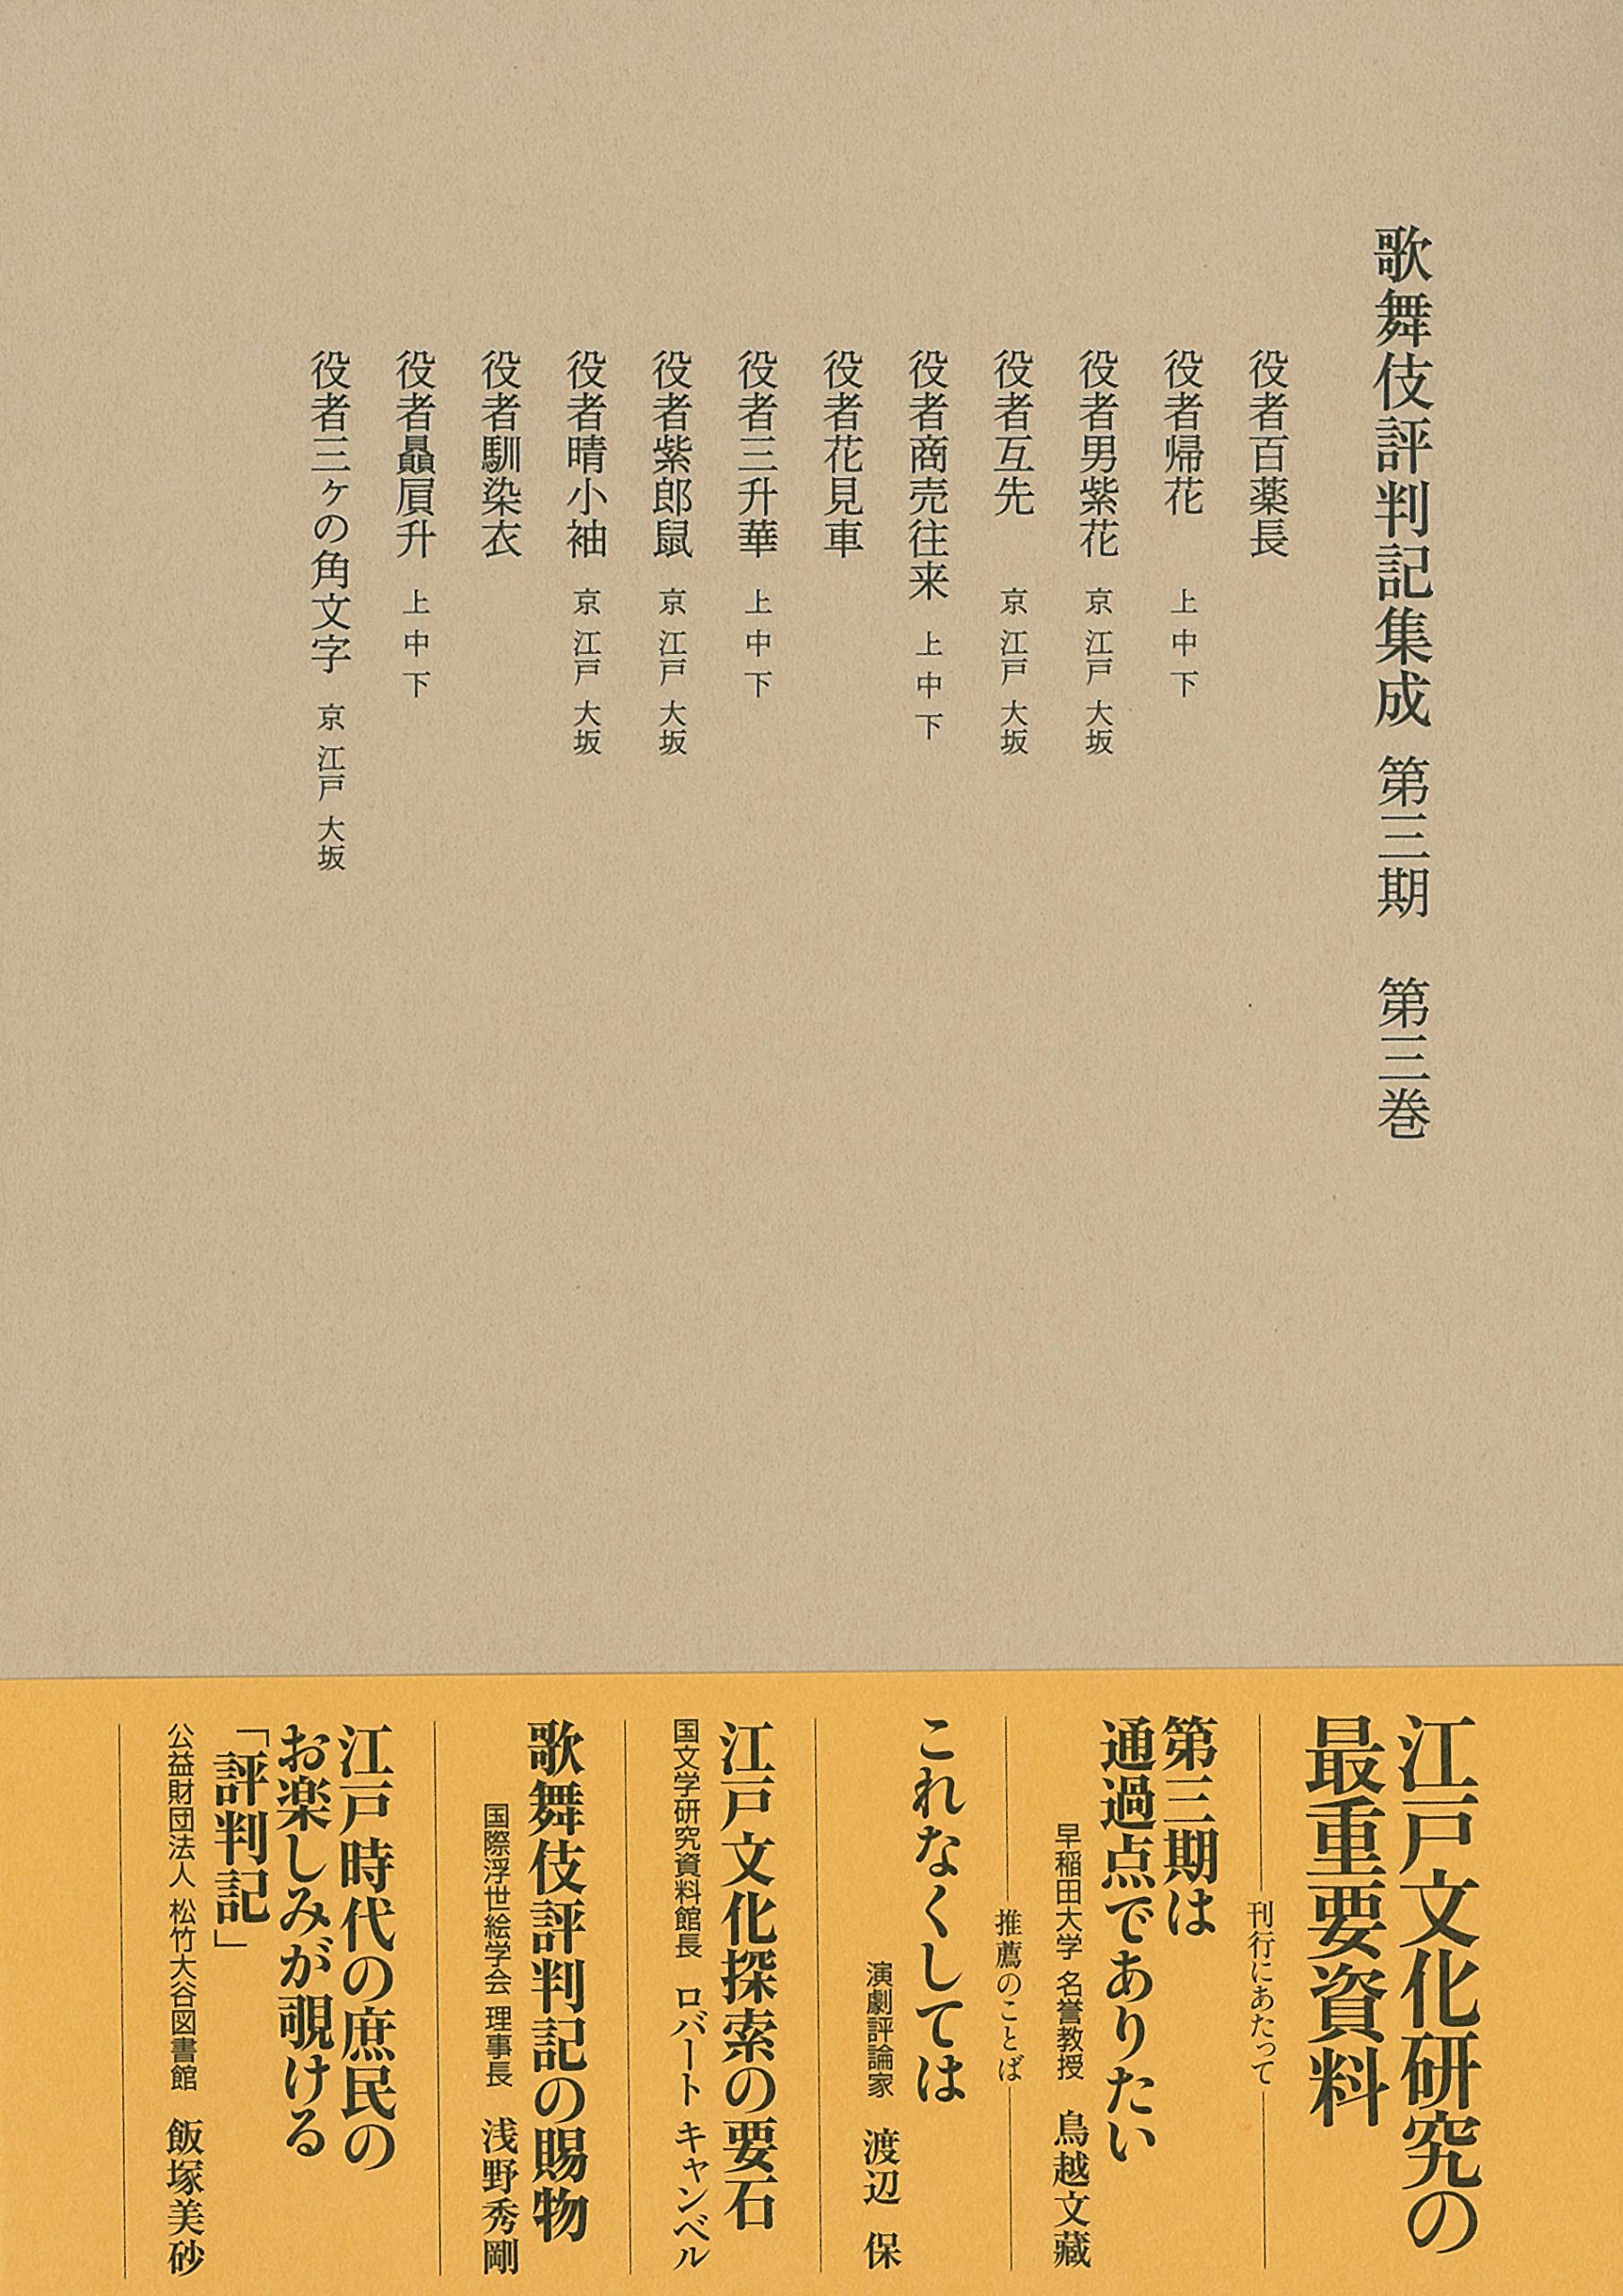 The Book『Collected Kabuki Hyobanki, Third Period, Volume 3: From An'ei 7 to An'ei 10』has been published 